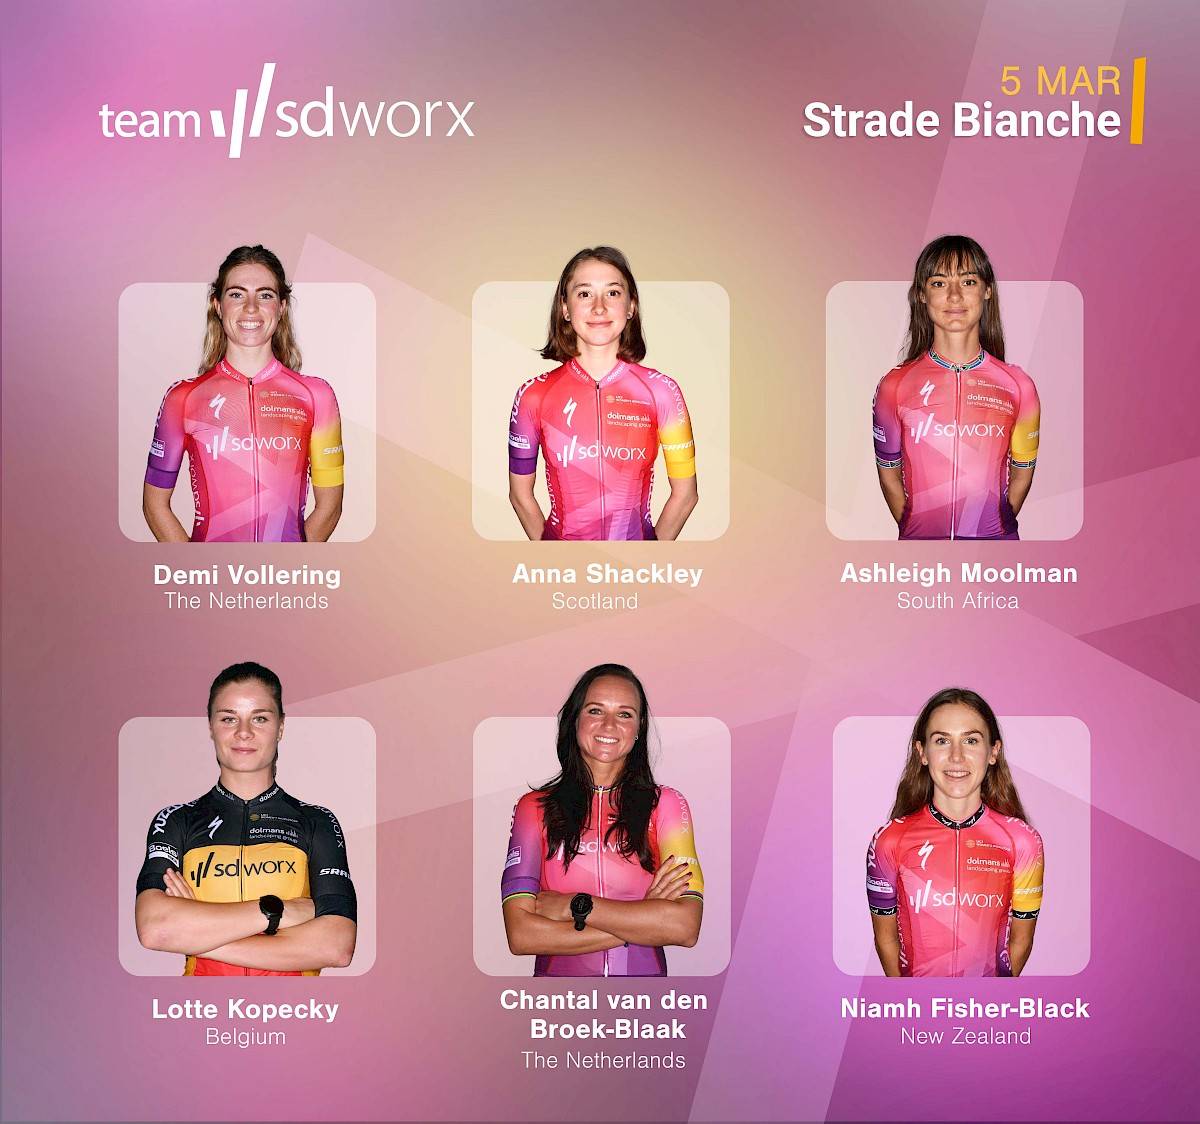 Team SD Worx with confidence towards Strade Bianche